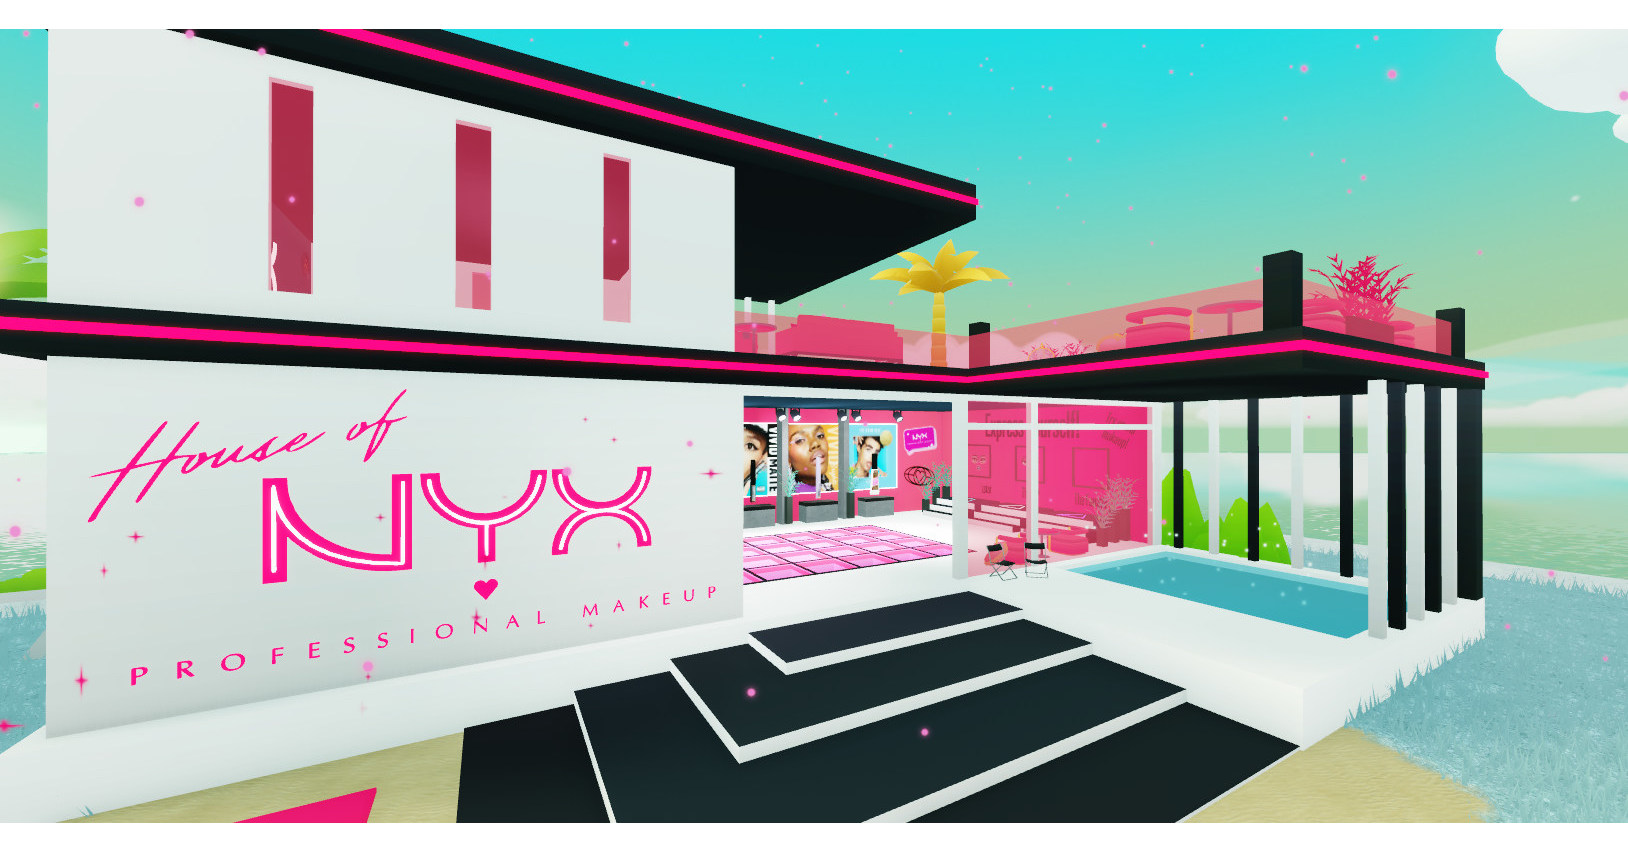 NYX PROFESSIONAL MAKEUP LAUNCHES LATEST EXPANSION INTO THE METAVERSE WITH ‘HOUSE OF NYX PROFESSIONAL MAKEUP’ IN IHEARTLAND ON ROBLOX